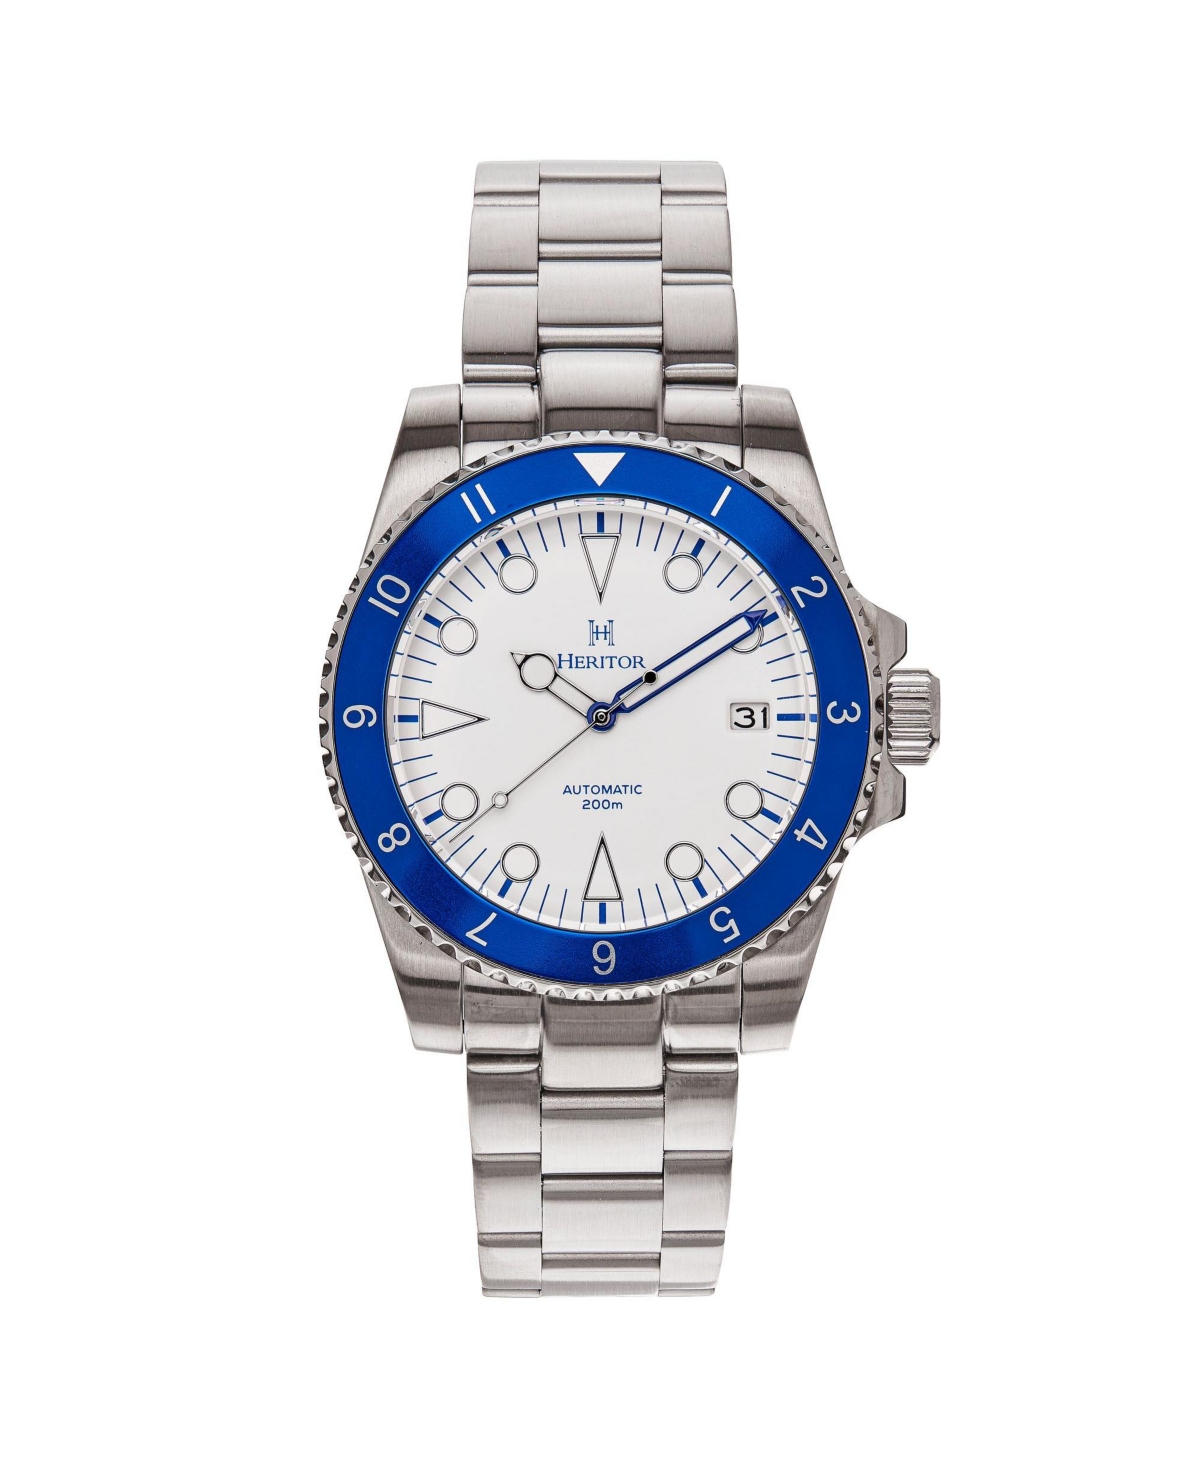 Men Luciano Stainless Steel Watch - Blue/White, 41mm - Blue/white